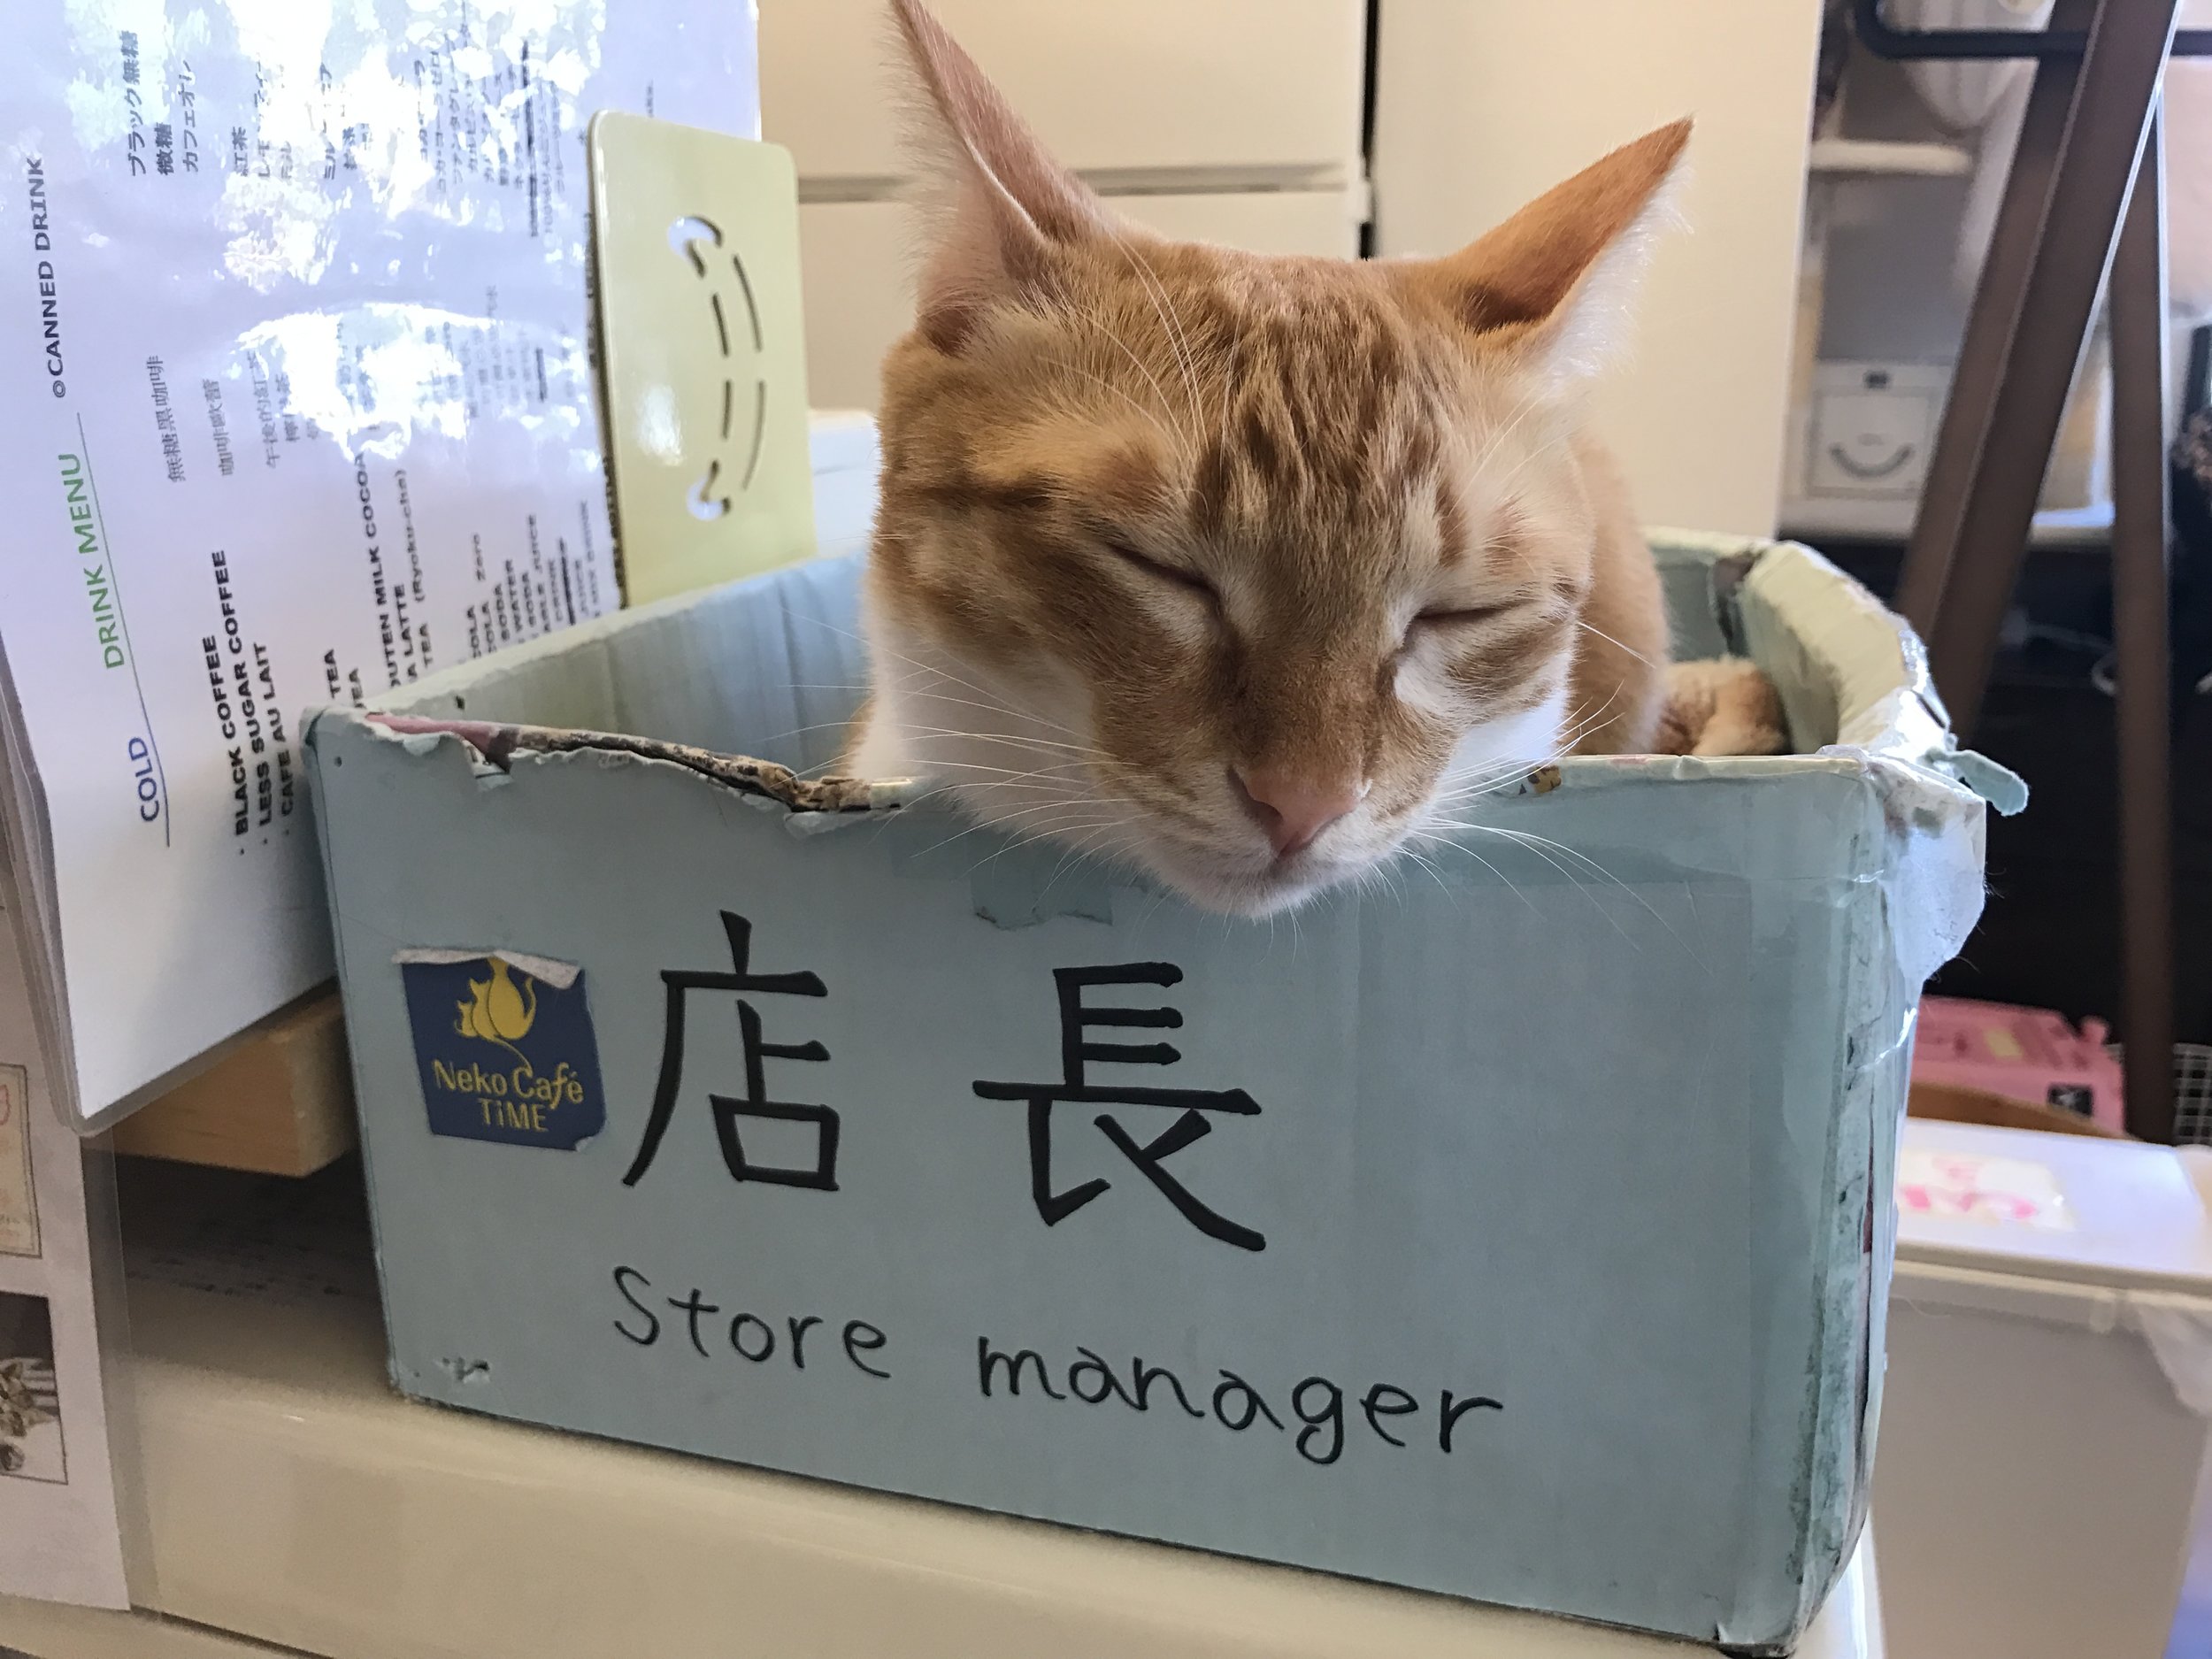 13 cats live at Neko Cafe Time, including Bob, the 'store manager'